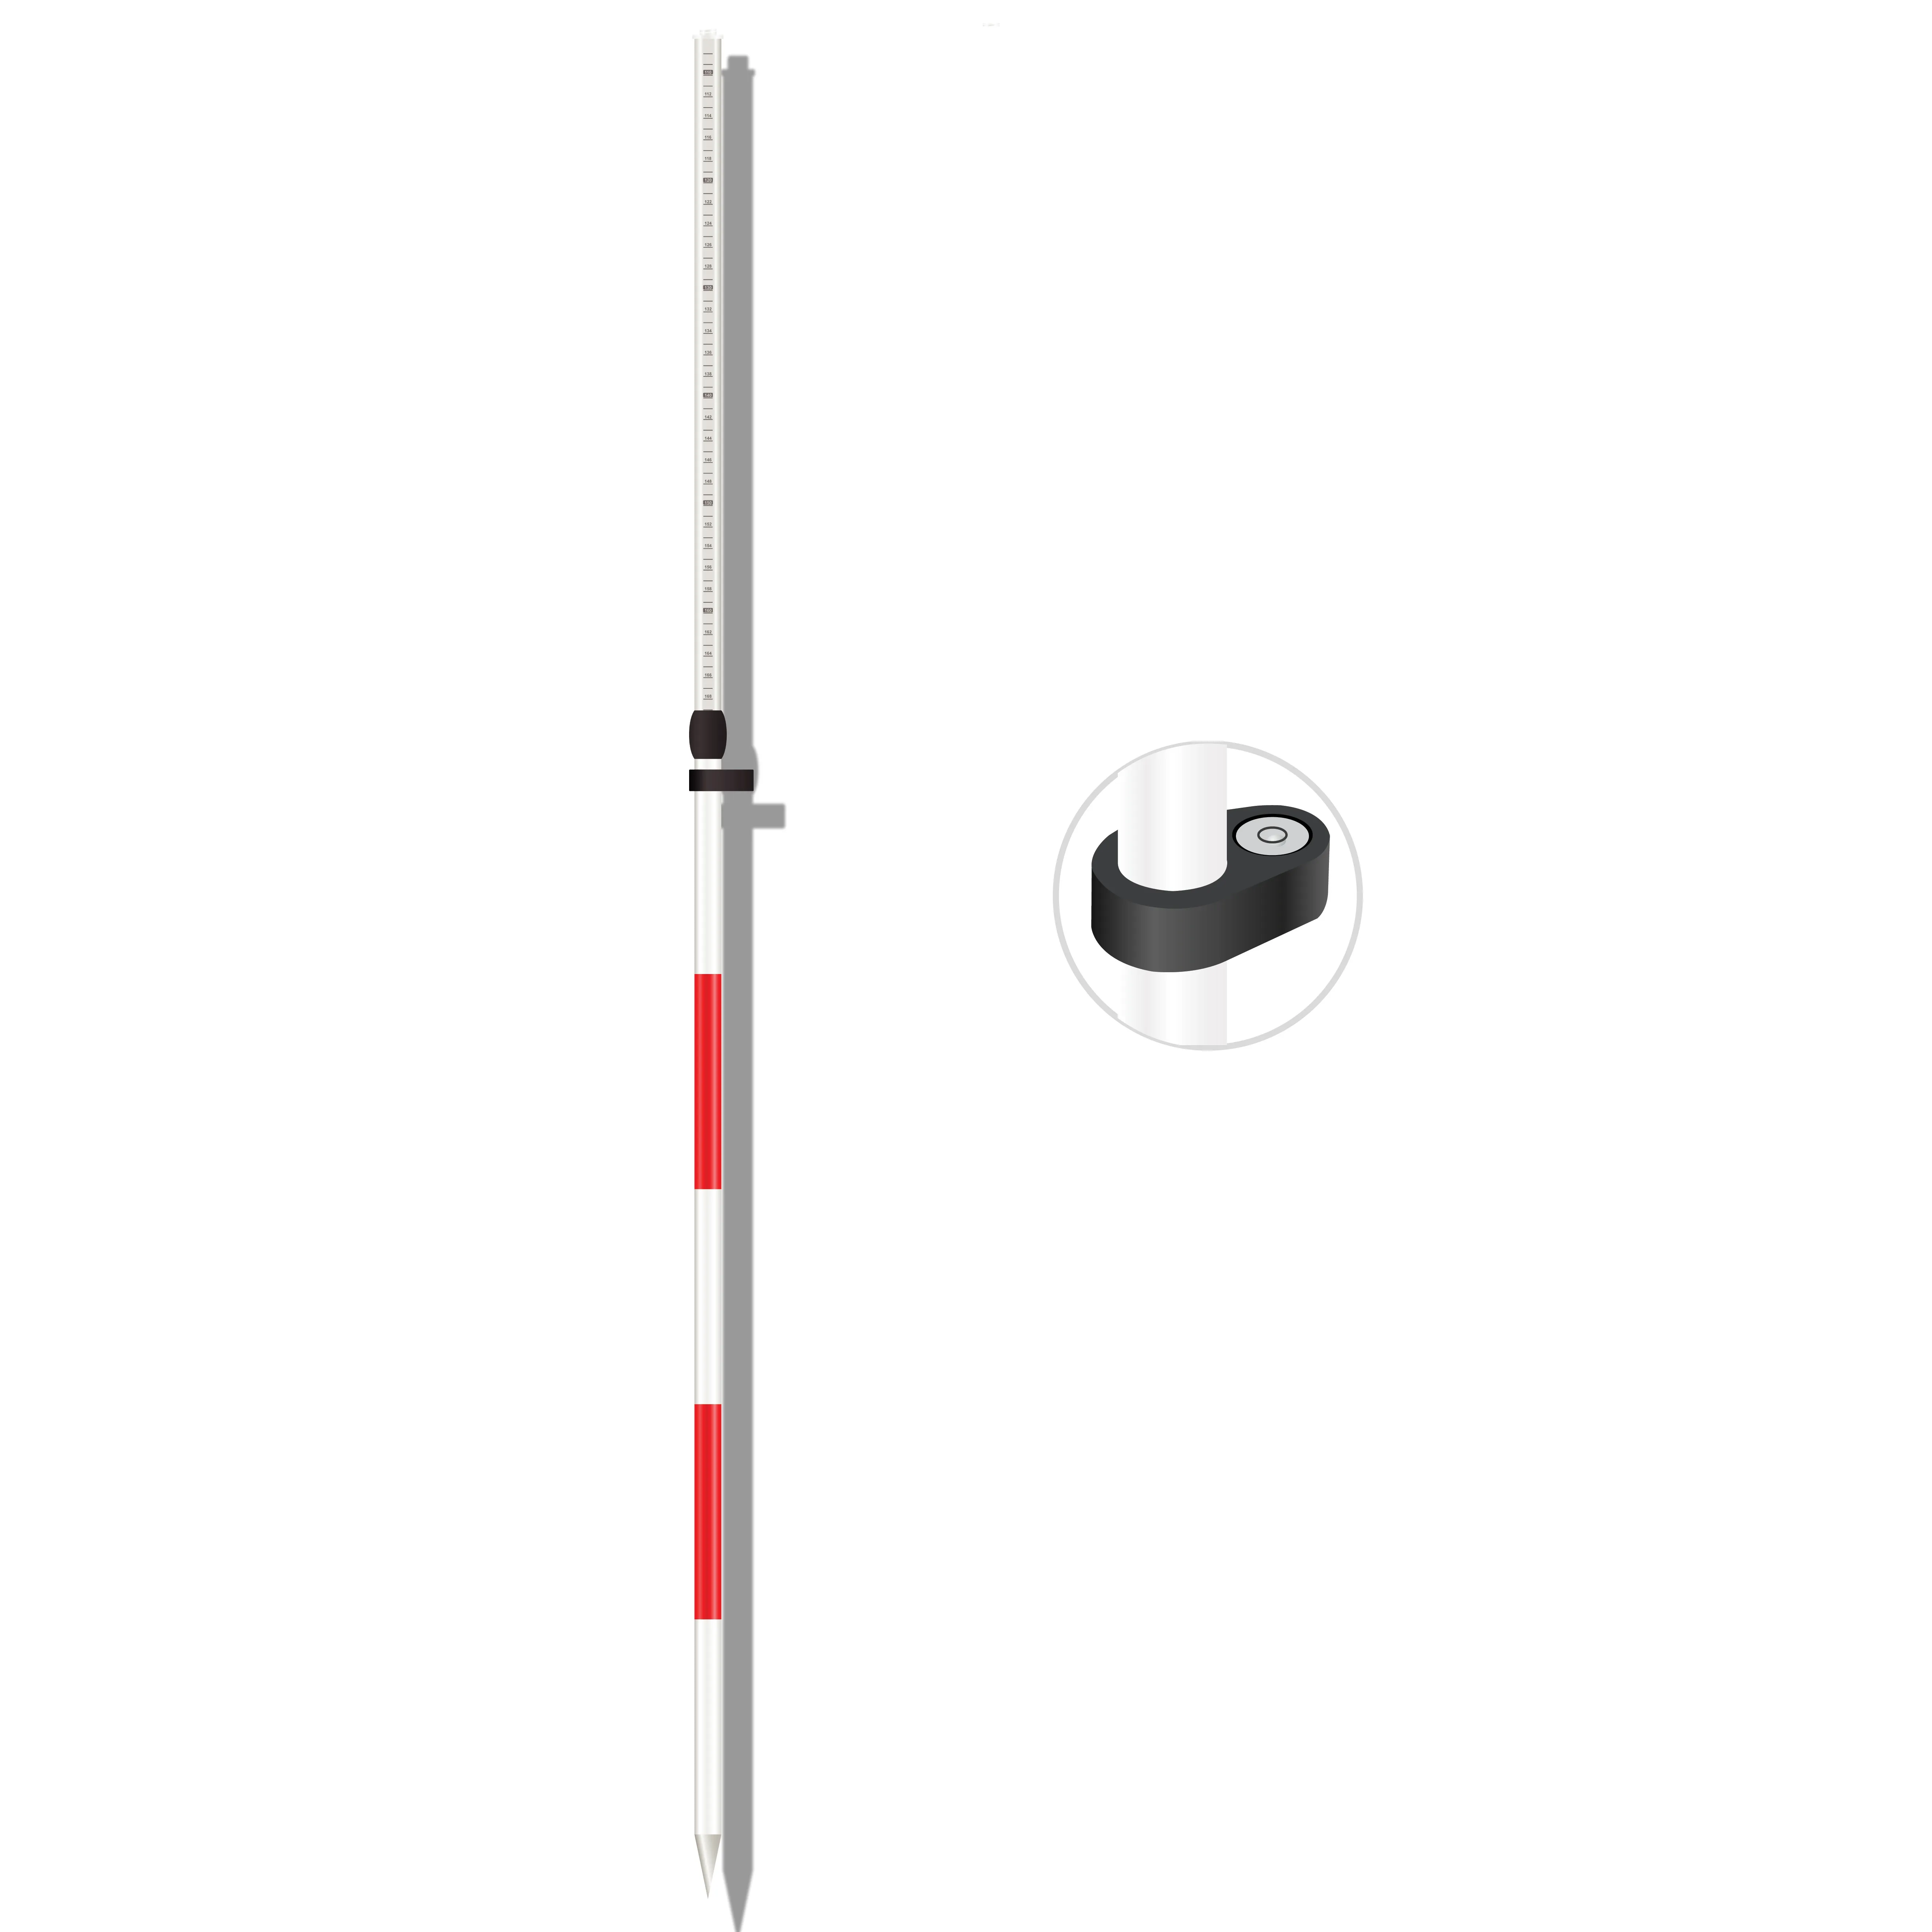 Myzox PP-200EV 2m 2-Section Prism Pole with Twist Lock - 5/8